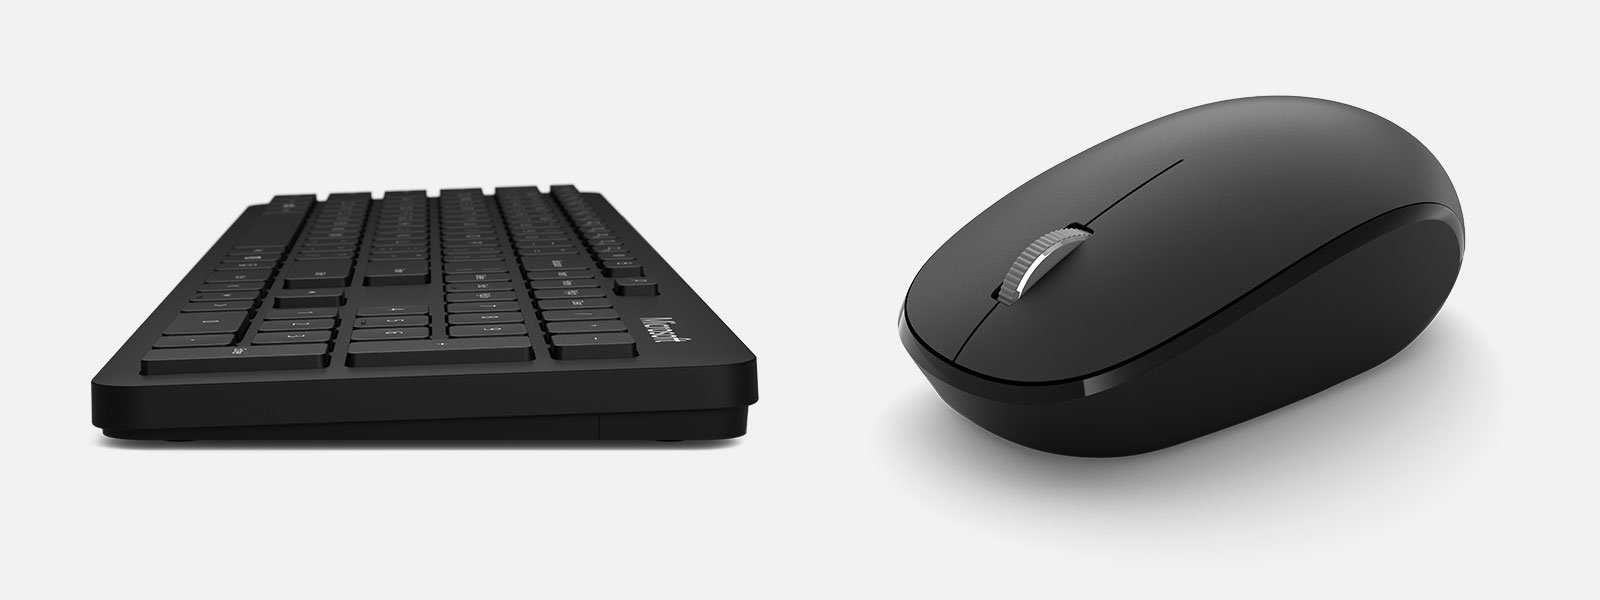 Microsoft Bluetooth® Desktop, which includes a keyboard and mouse.